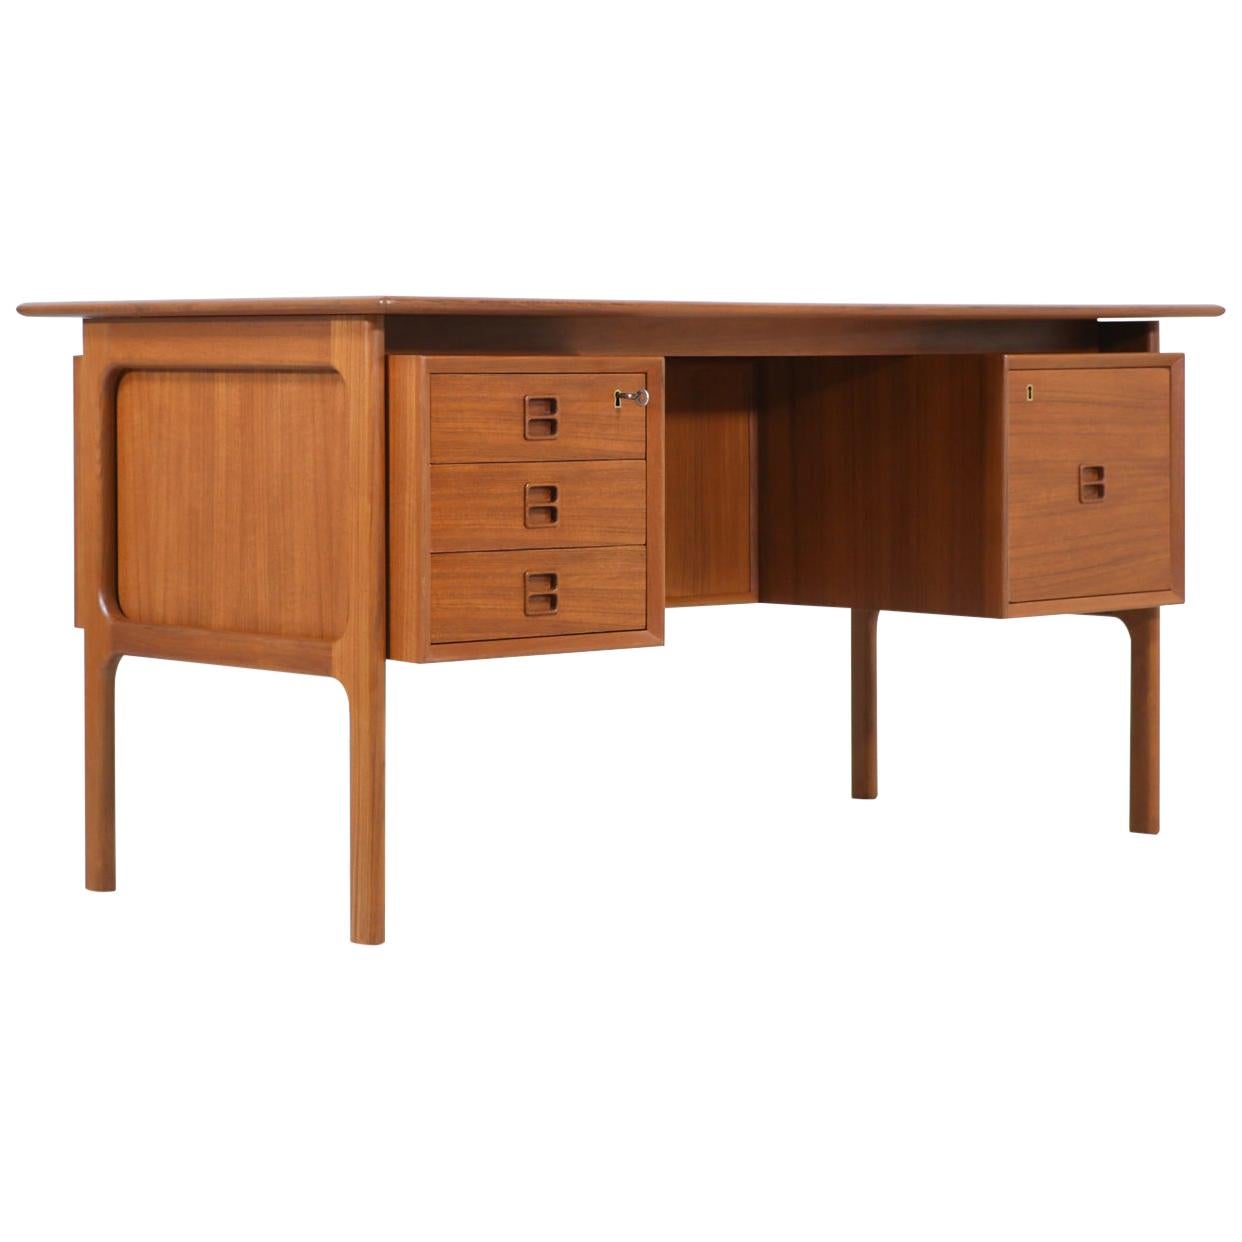 Elegant modern executive desk designed by Erik Brouer for Brouer Møbelfabrik in Denmark circa 1950s. This striking design features a teak wood frame with three spacious drawers on its left side and a large filing drawer on its right side. Its best